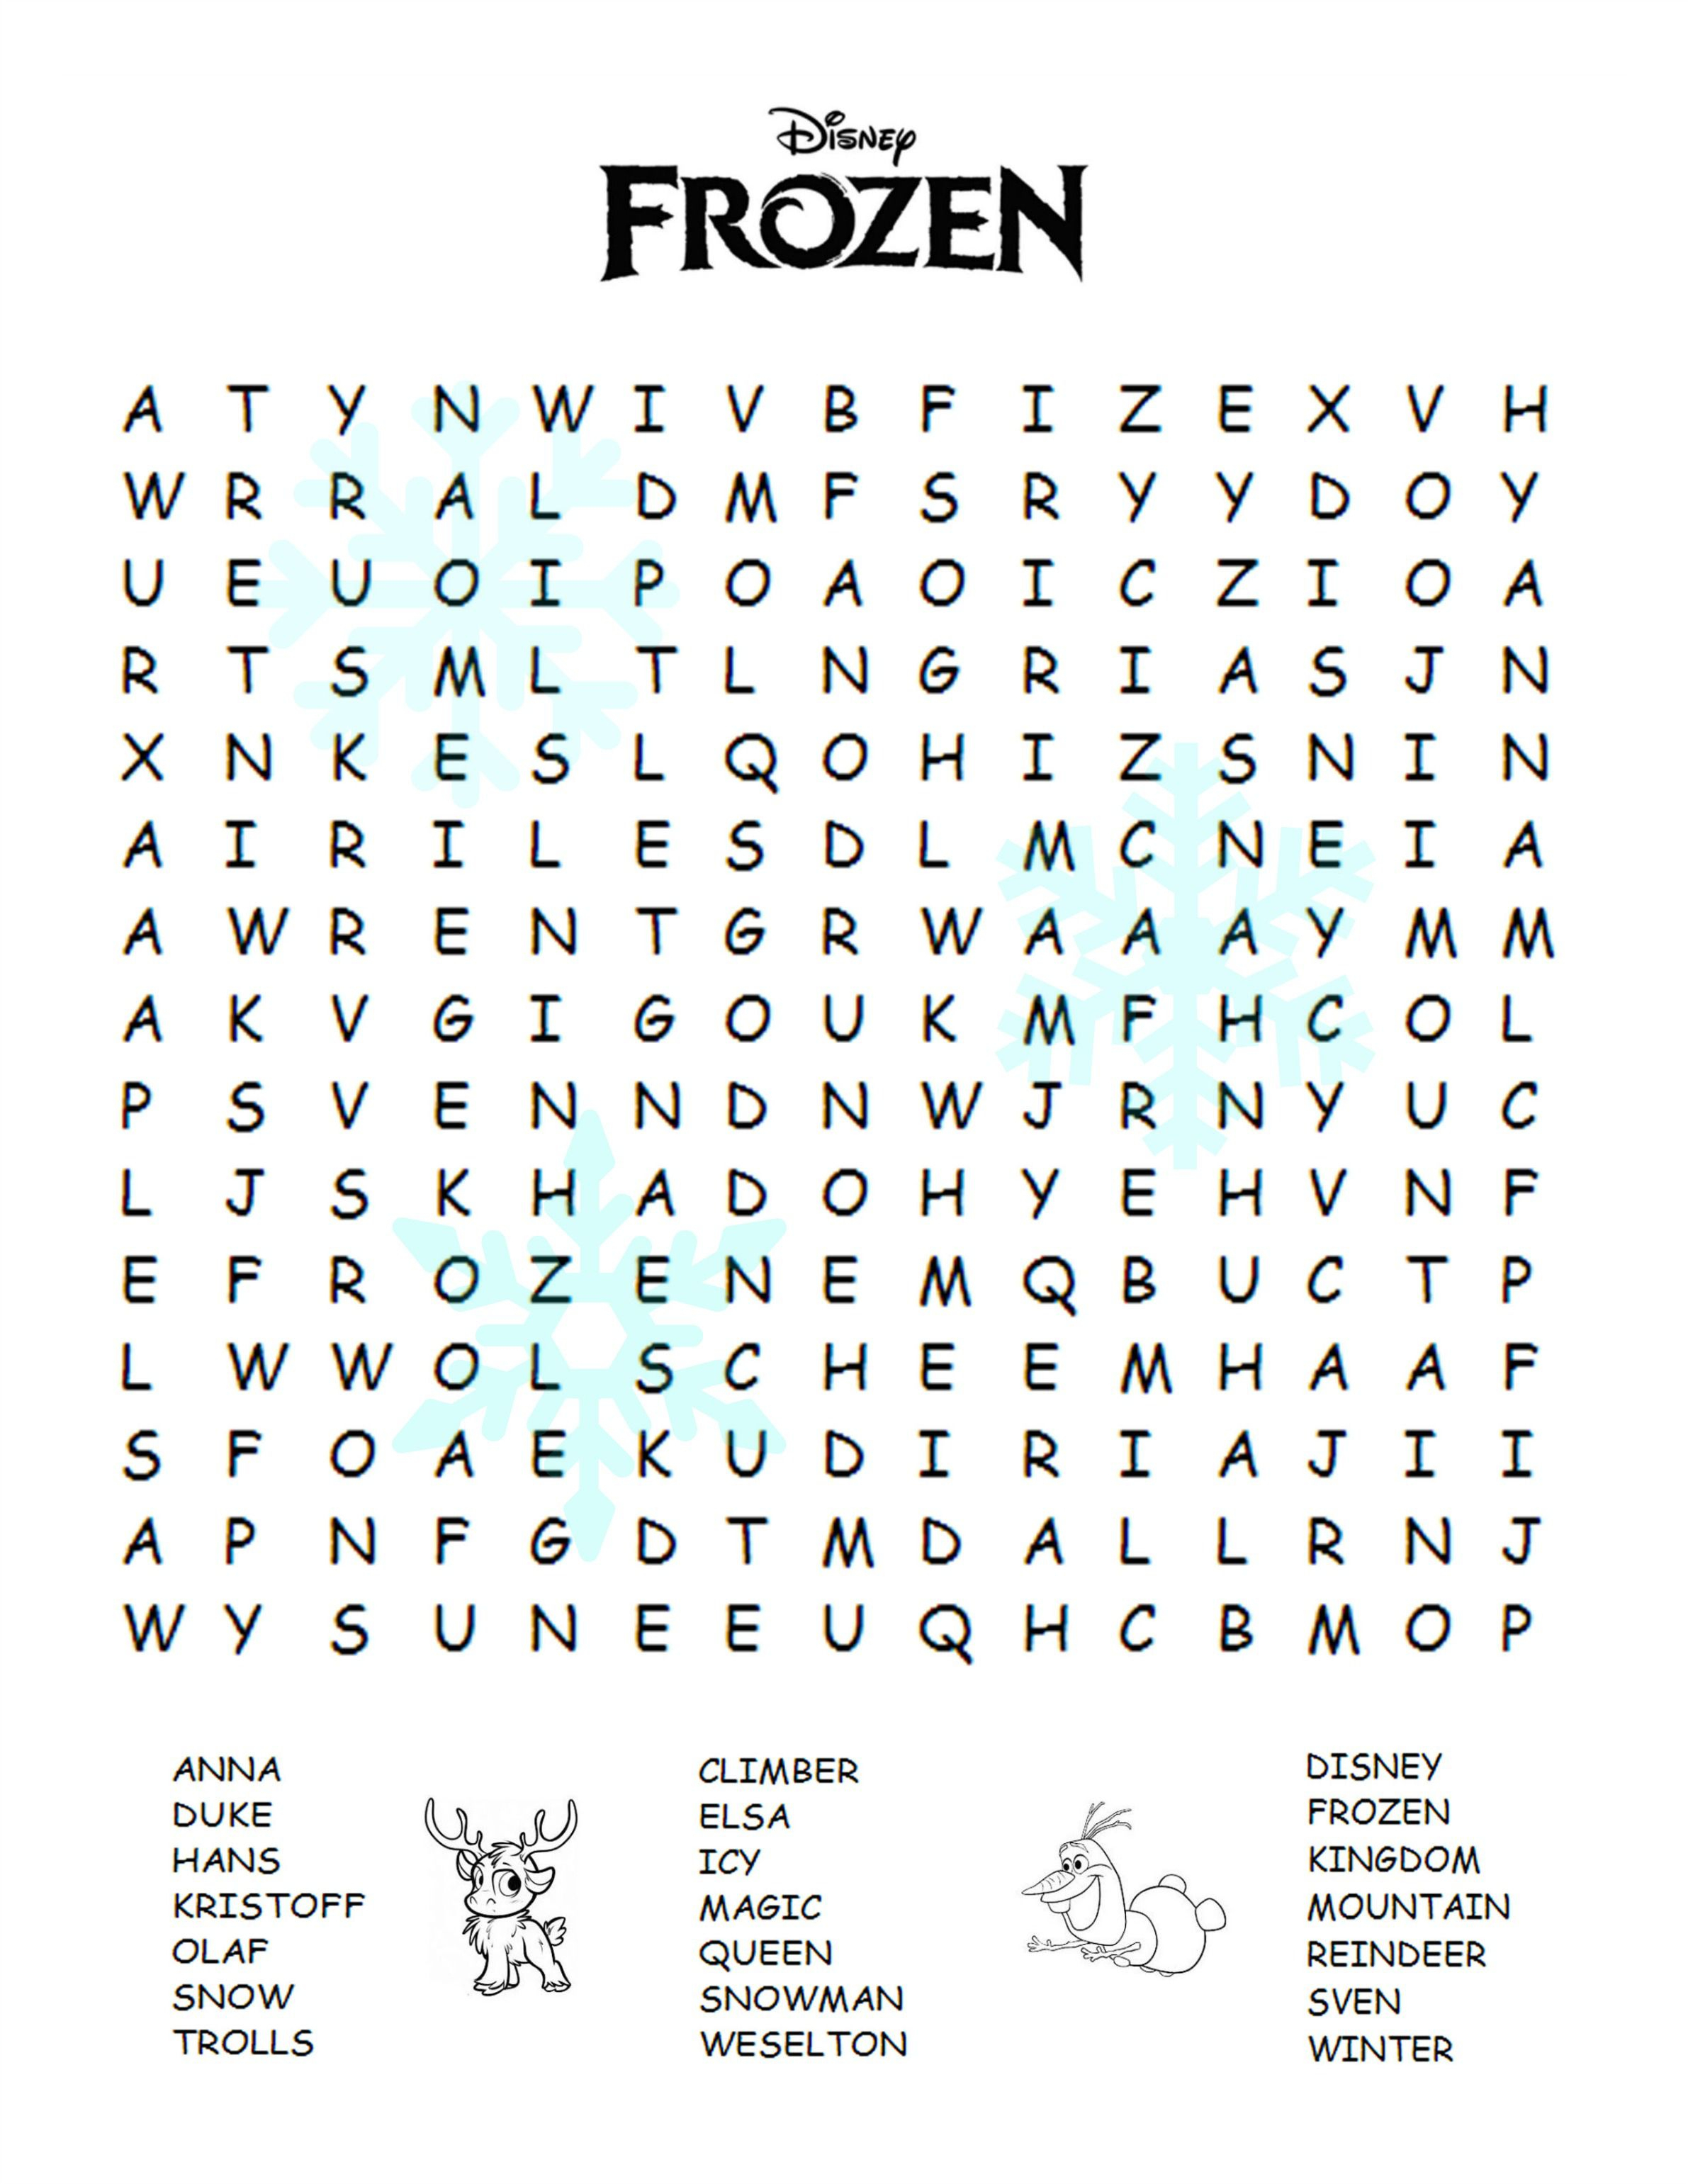 Frozen Movie Review Plus Fun Printable Activities For The Kids - Printable Word Puzzles For 6 Year Olds